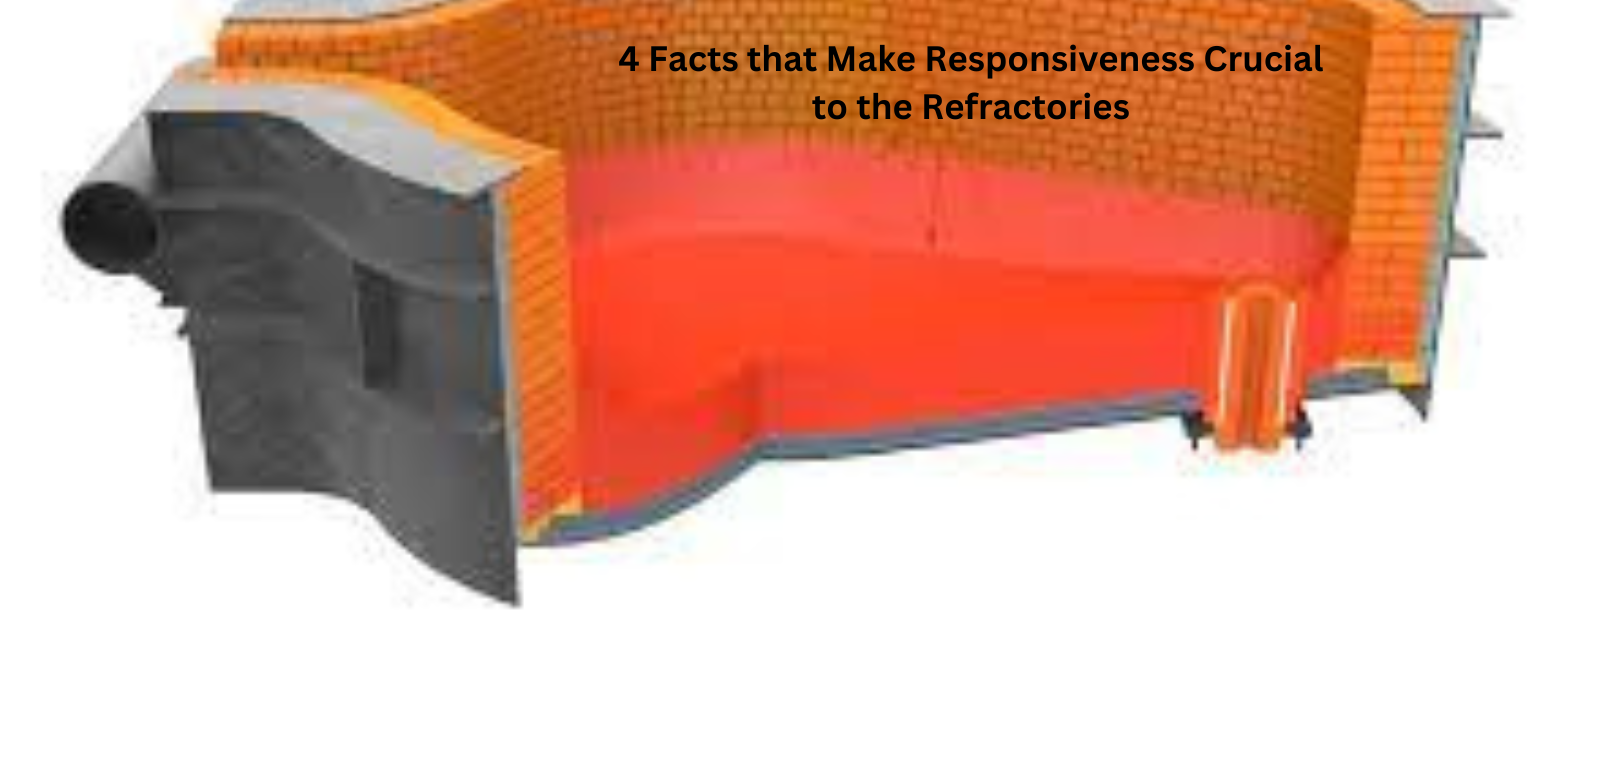 4 Facts that Make Responsiveness Crucial to the Refractories